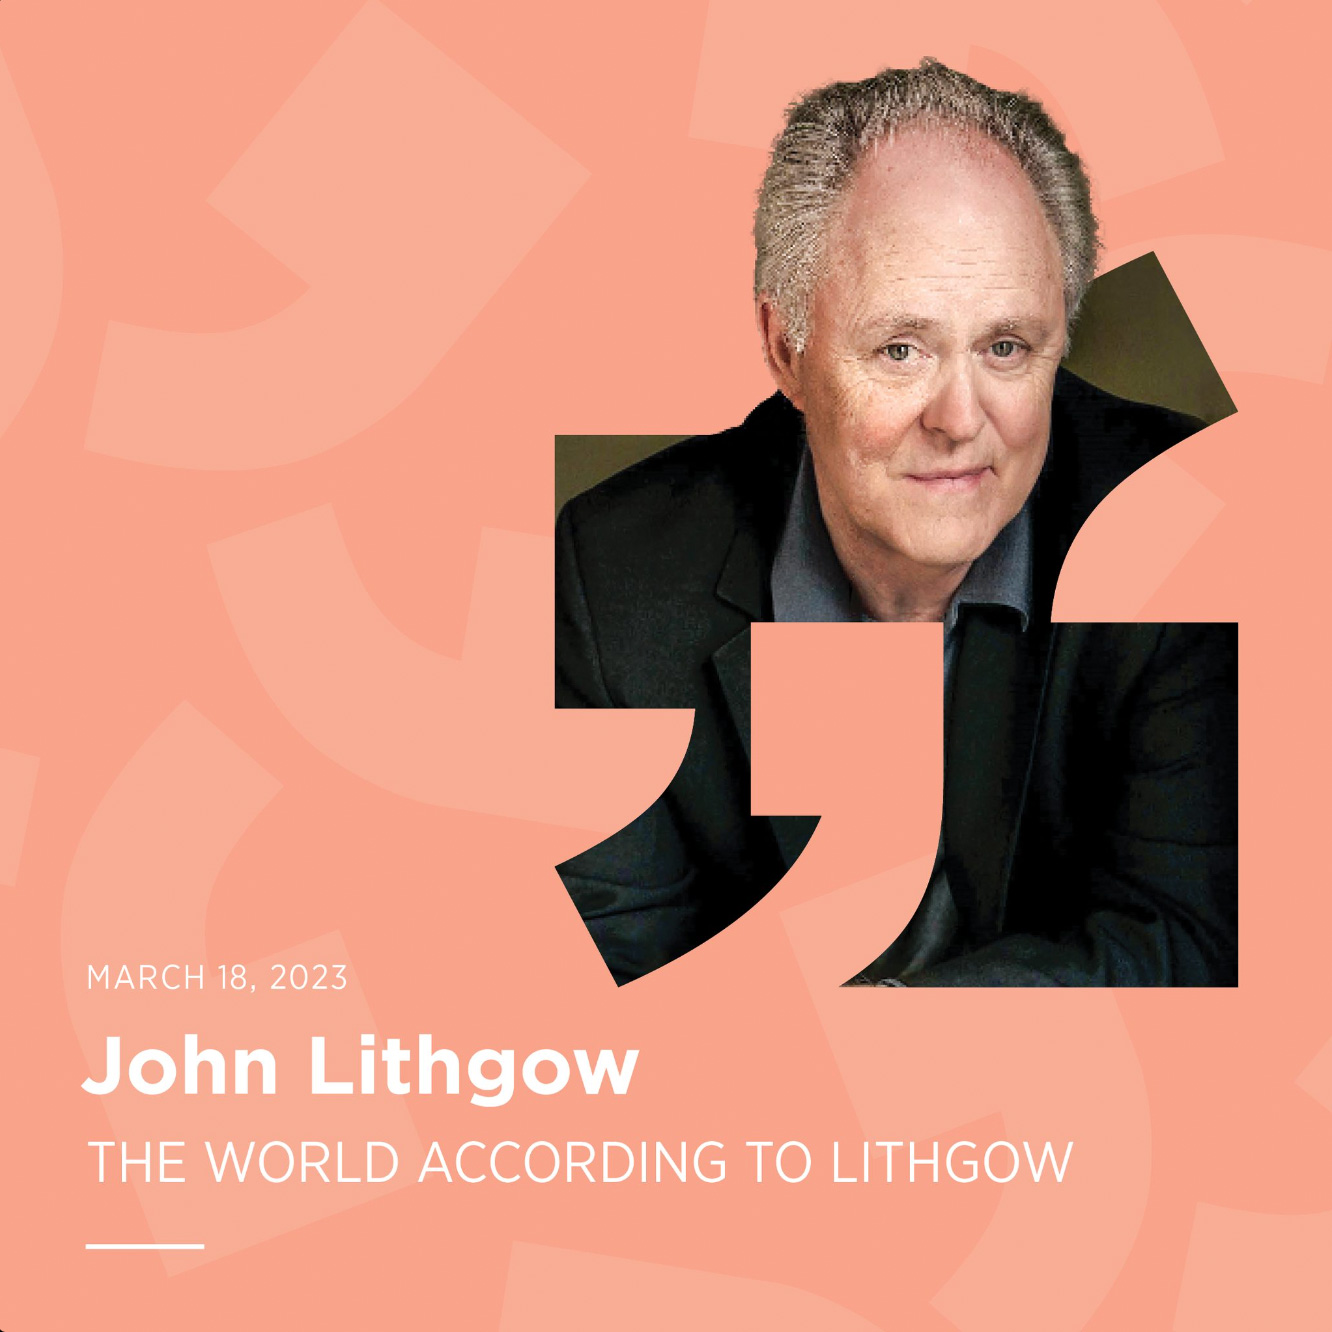 Event promo for John Lithgow